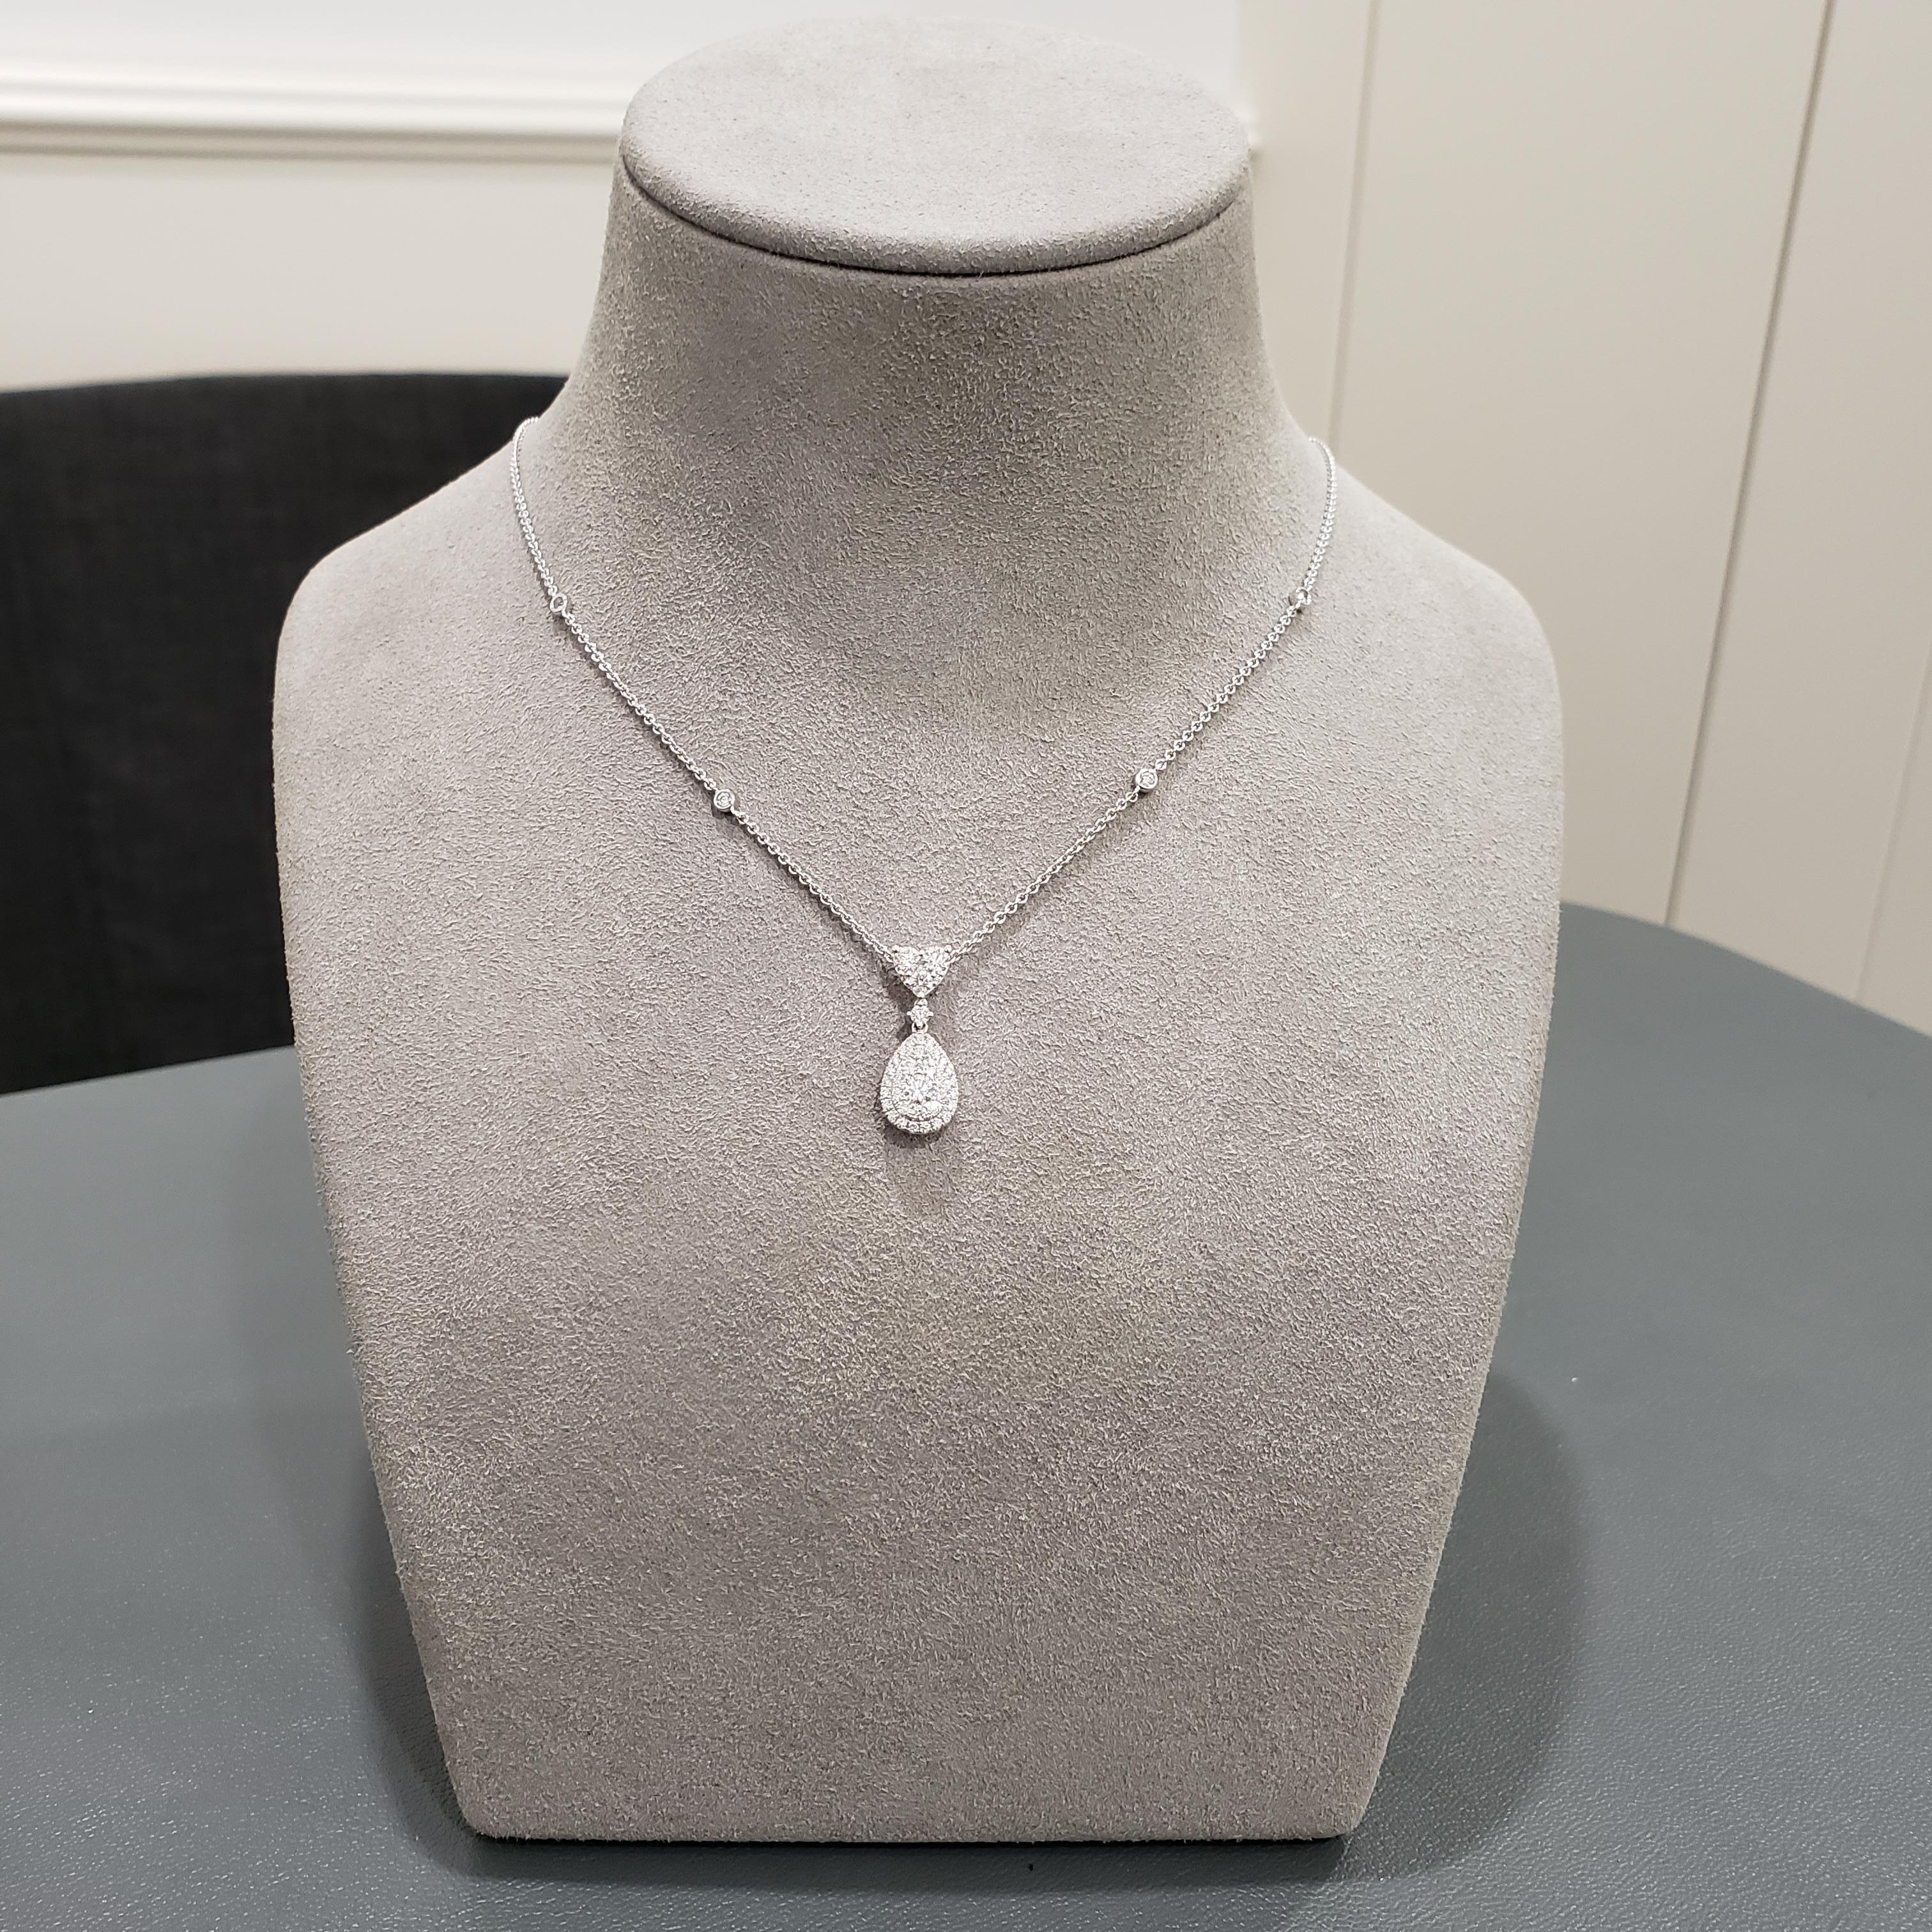 A simple illusion pendant necklace showcasing a cluster of round brilliant diamonds, set in a pear shape design. Suspended in a diamonds by the yard chain. Diamonds weigh 0.89 carats total. Made in 18 karat white gold. 

